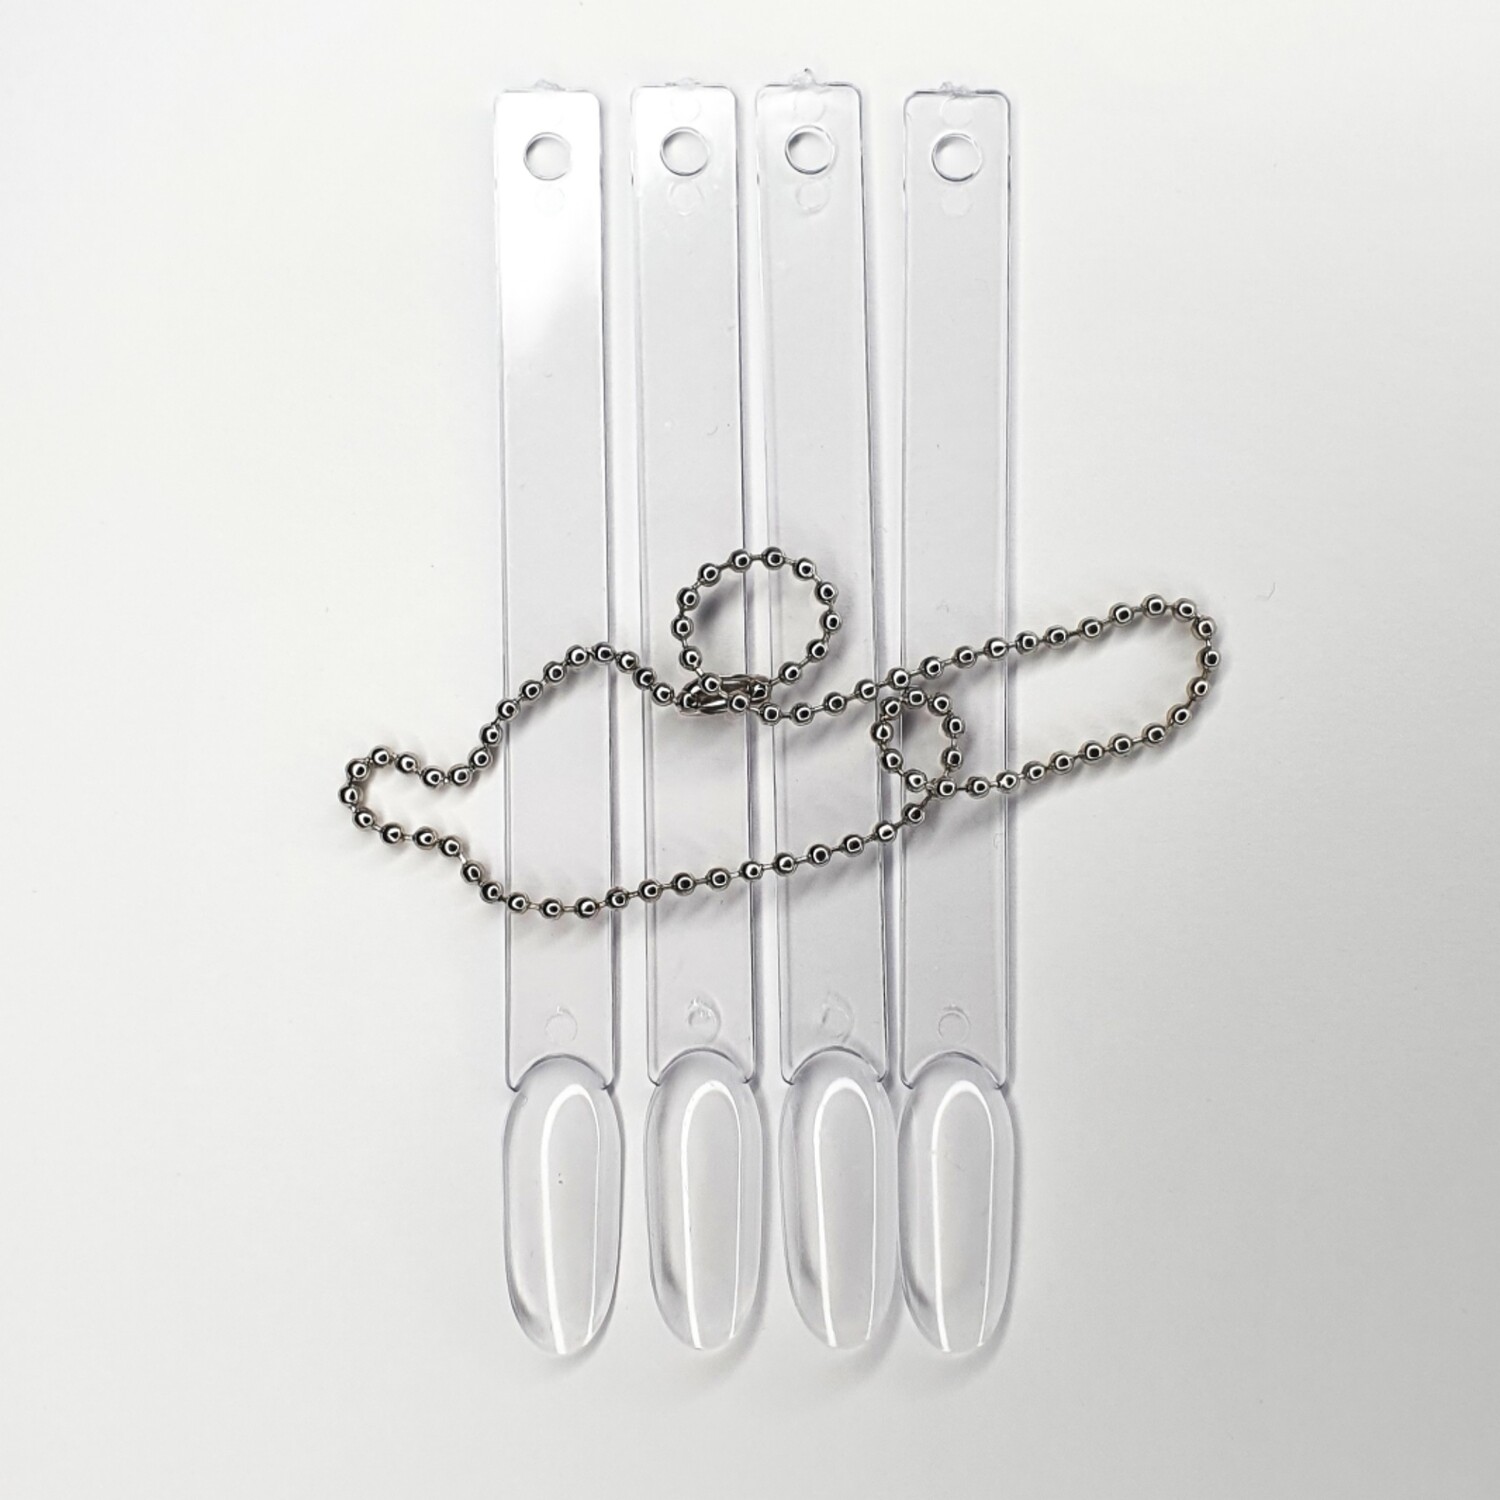 Nail Display Tip Sticks with a chain